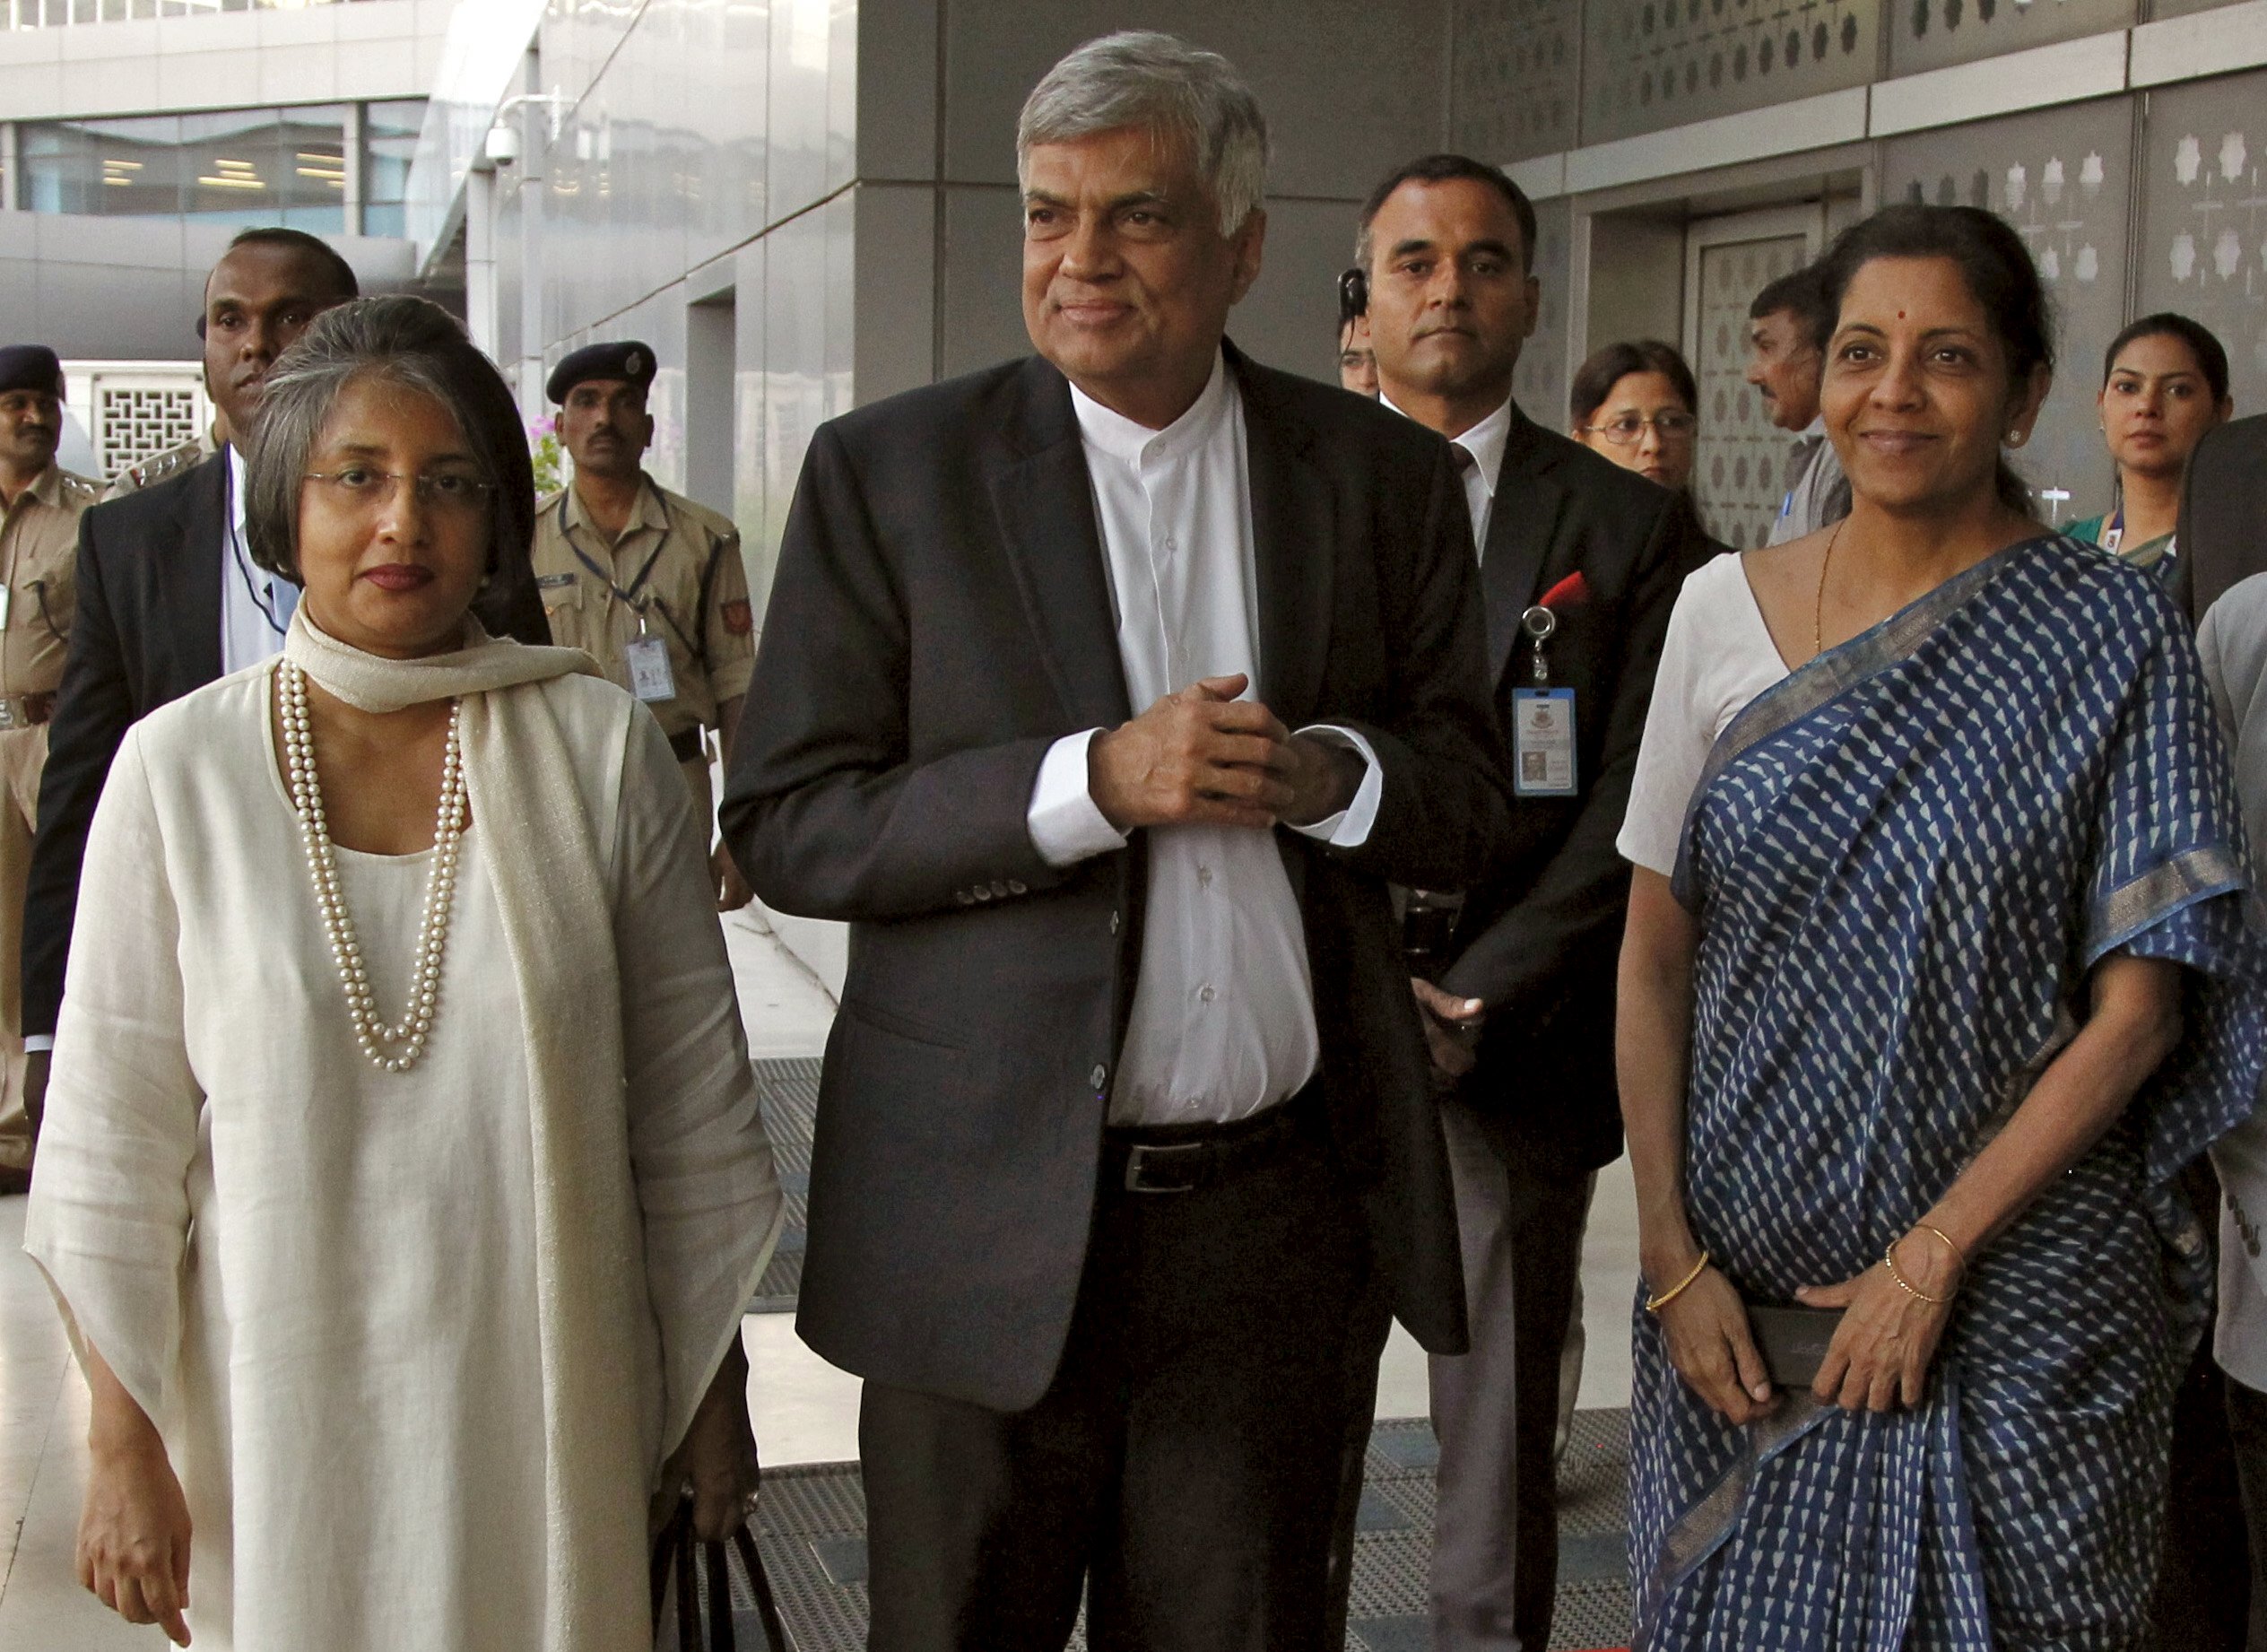 Sri Lanka's Prime Minister Ranil Wickremesinghe (C), his wife Maitree (L) and India's Commerce and Industry Minister Nirmala Sitharaman pose for photographs after Wickremesinghe arrived at the Indira Gandhi international airport in New Delhi, India, September 14, 2015. Wickremesinghe is on a three-day official visit to India. REUTERS/Stringer